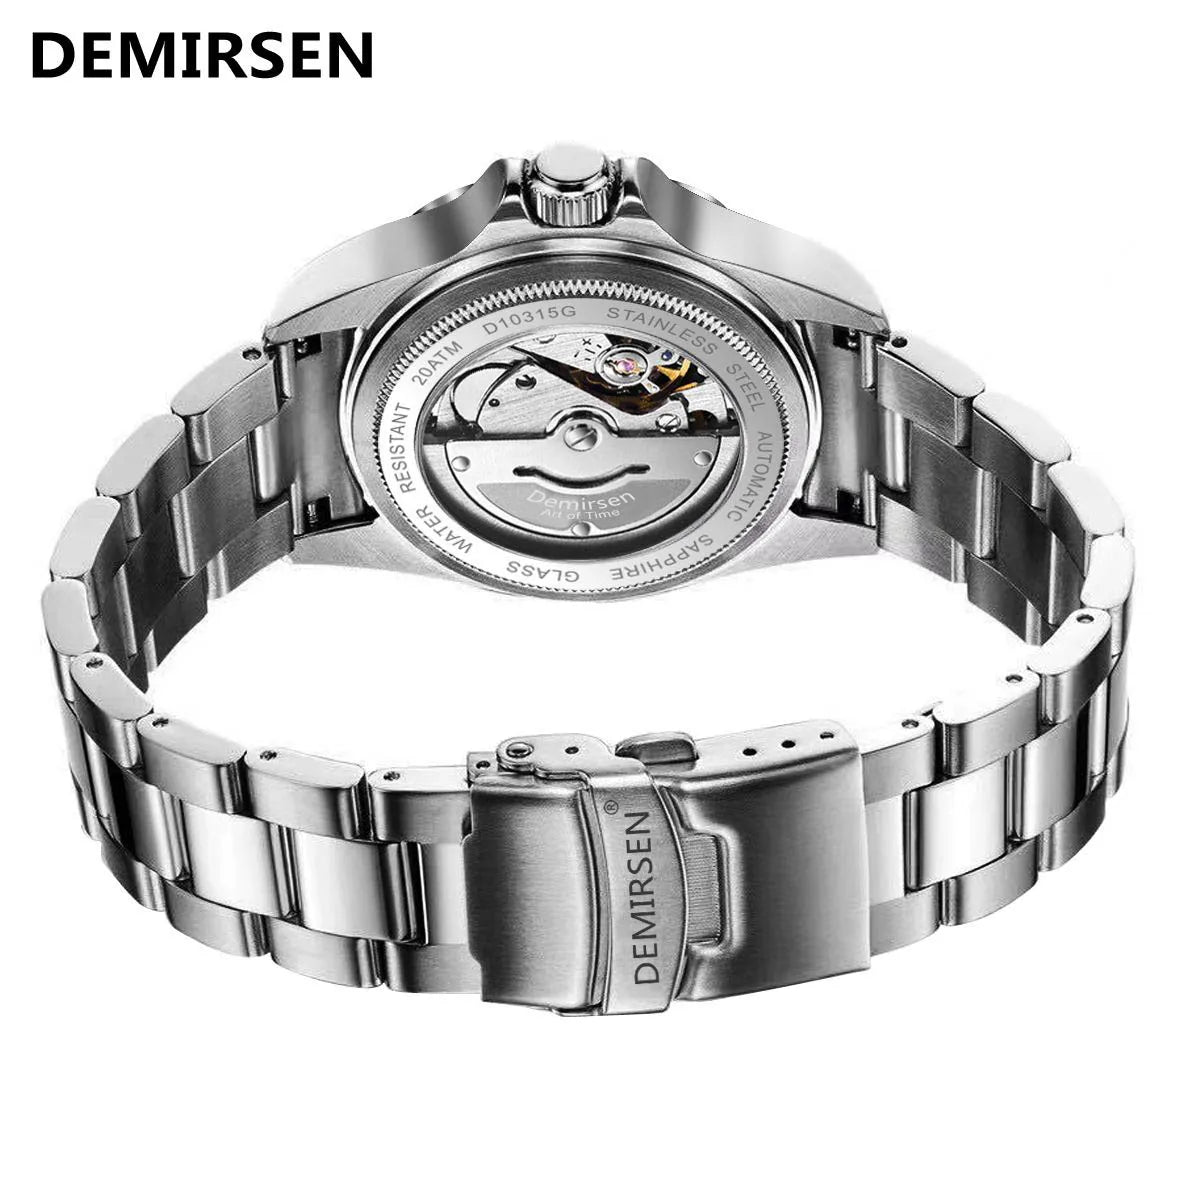 Demirsen Pink Stainless Steel Automatic Watch